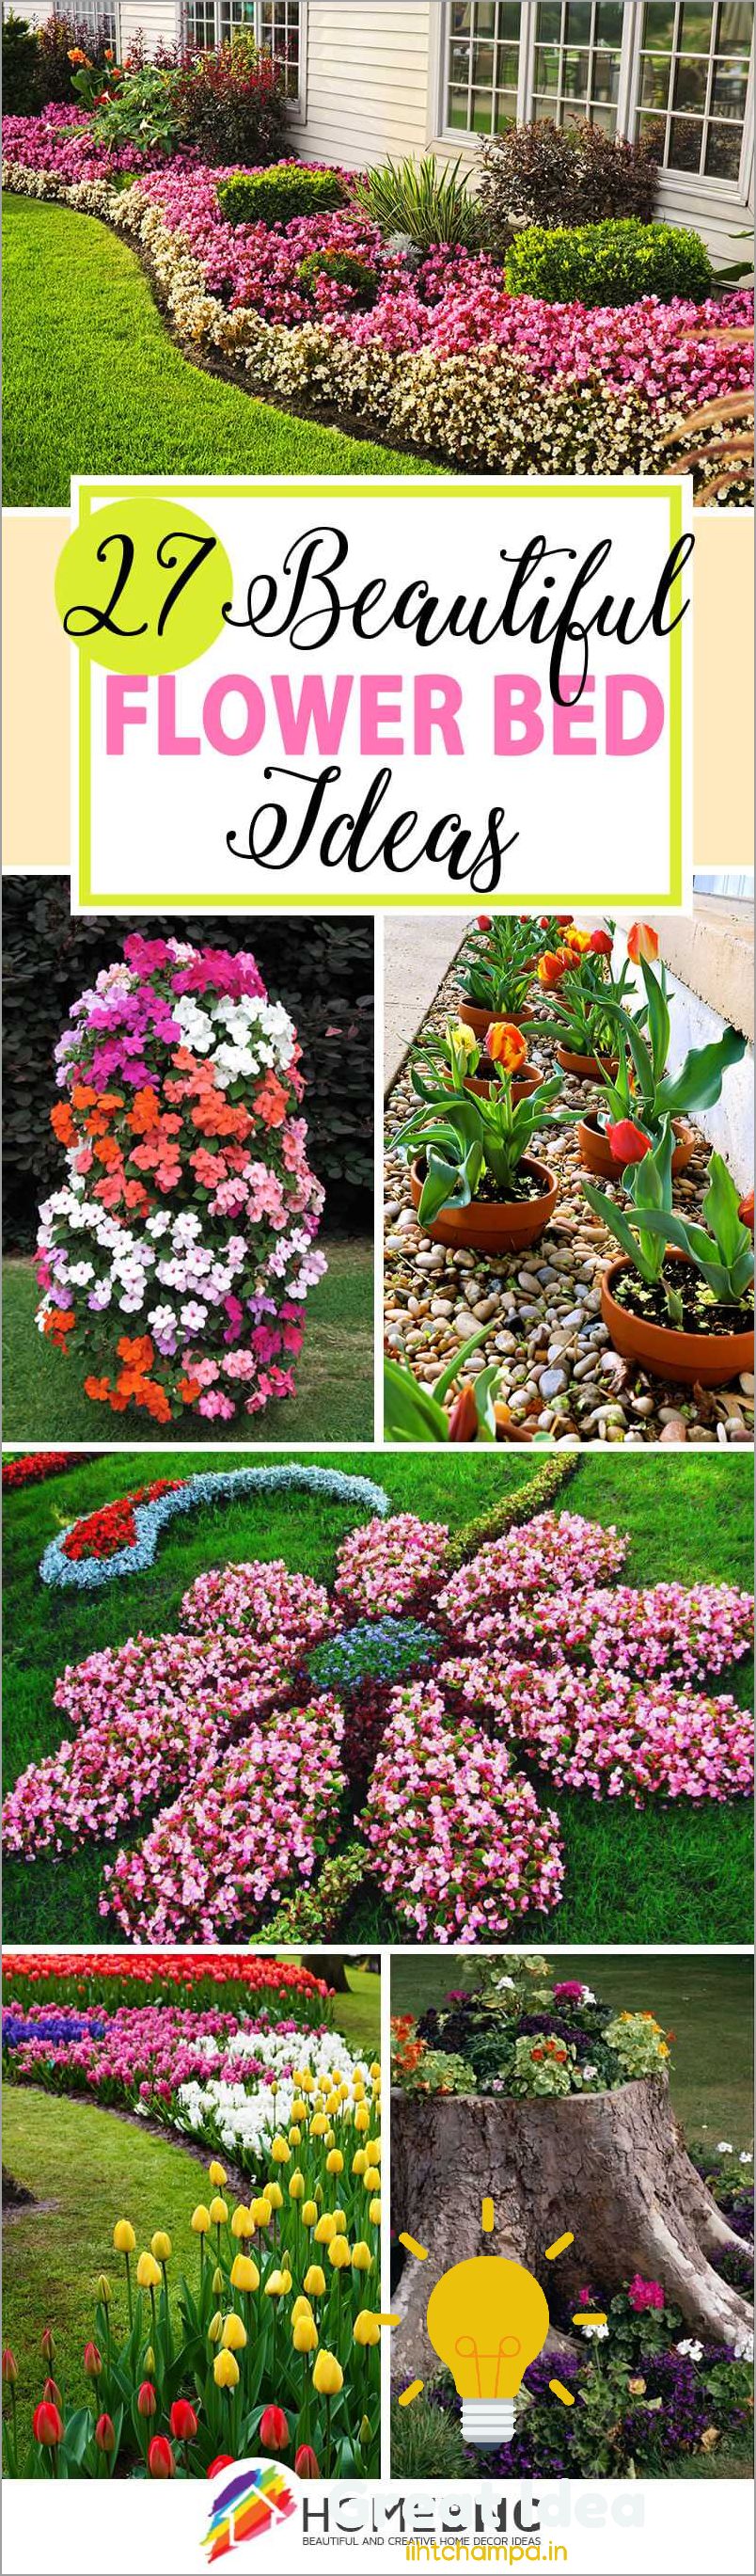 Ideas for Flower Beds Creative and Beautiful Designs for Your Garden